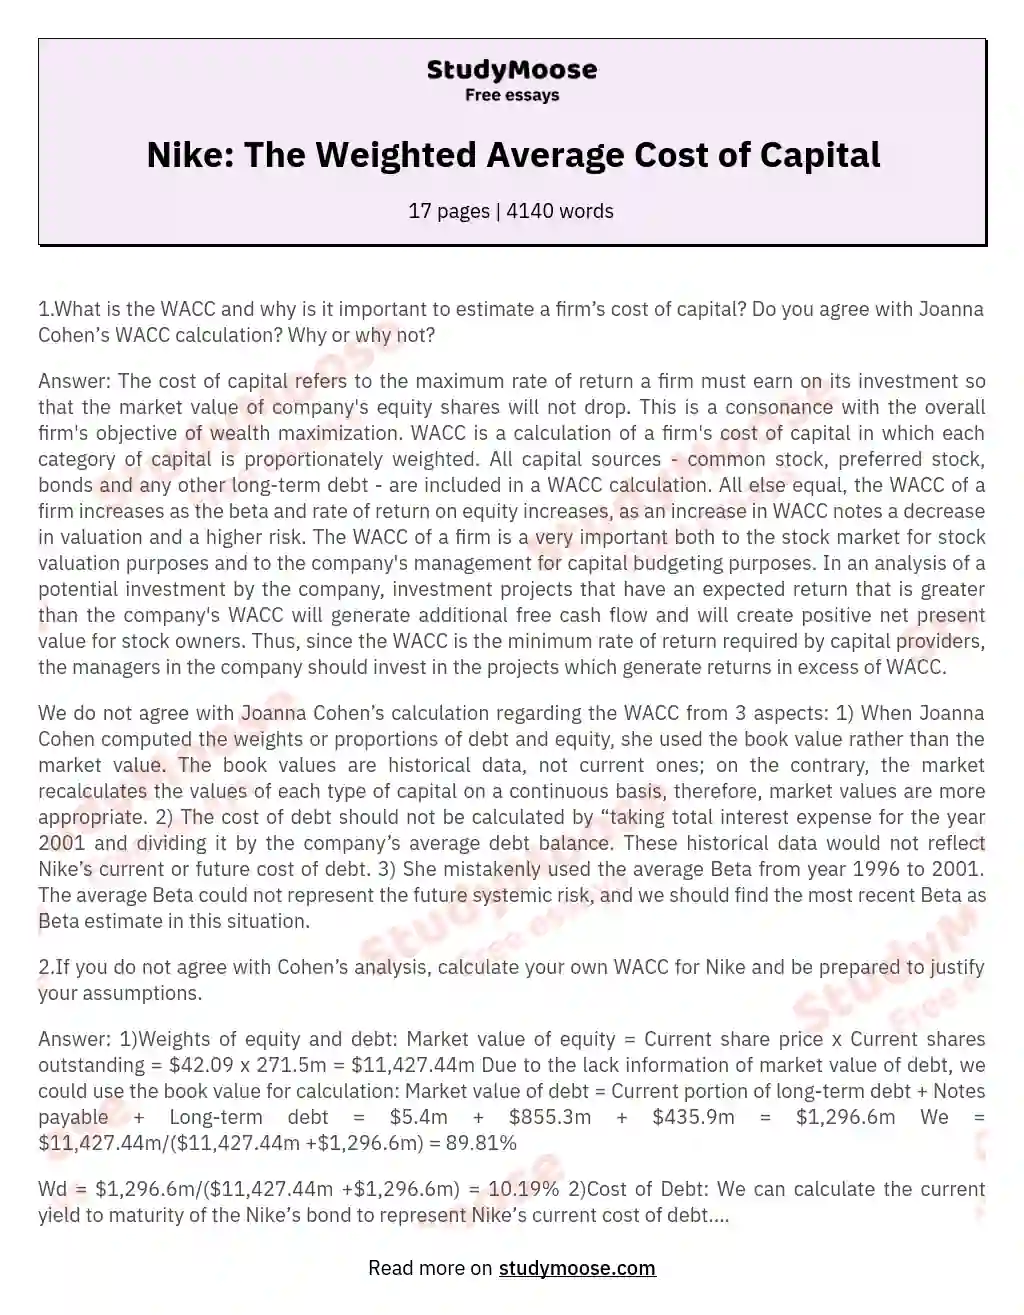 Nike: The Weighted Average Cost of Capital essay